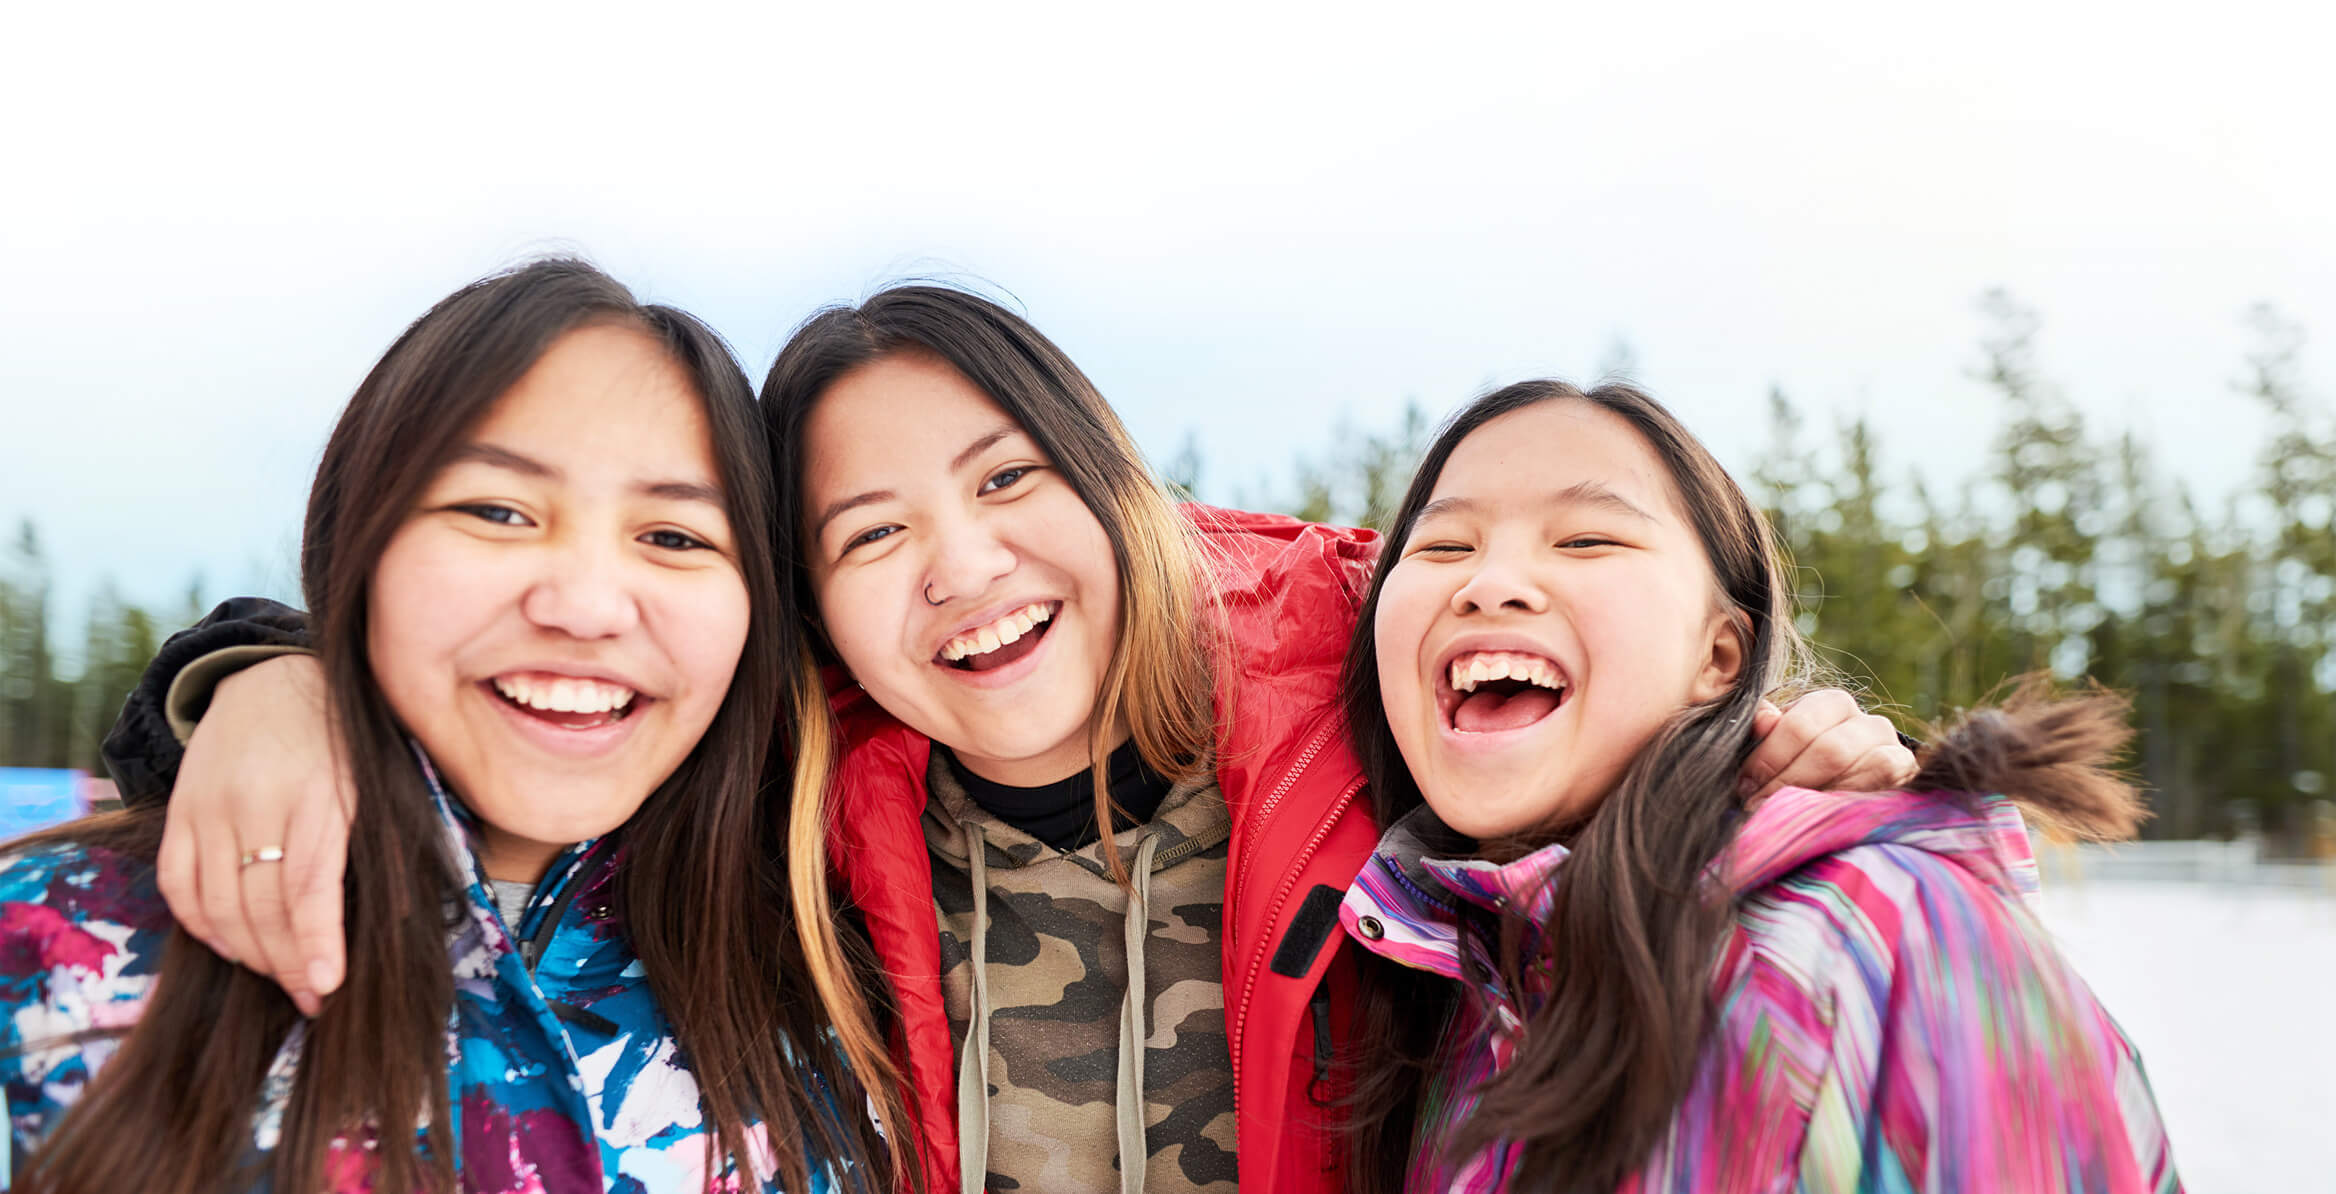 Three teenage girls laughing and smiling as they look forward to the future.